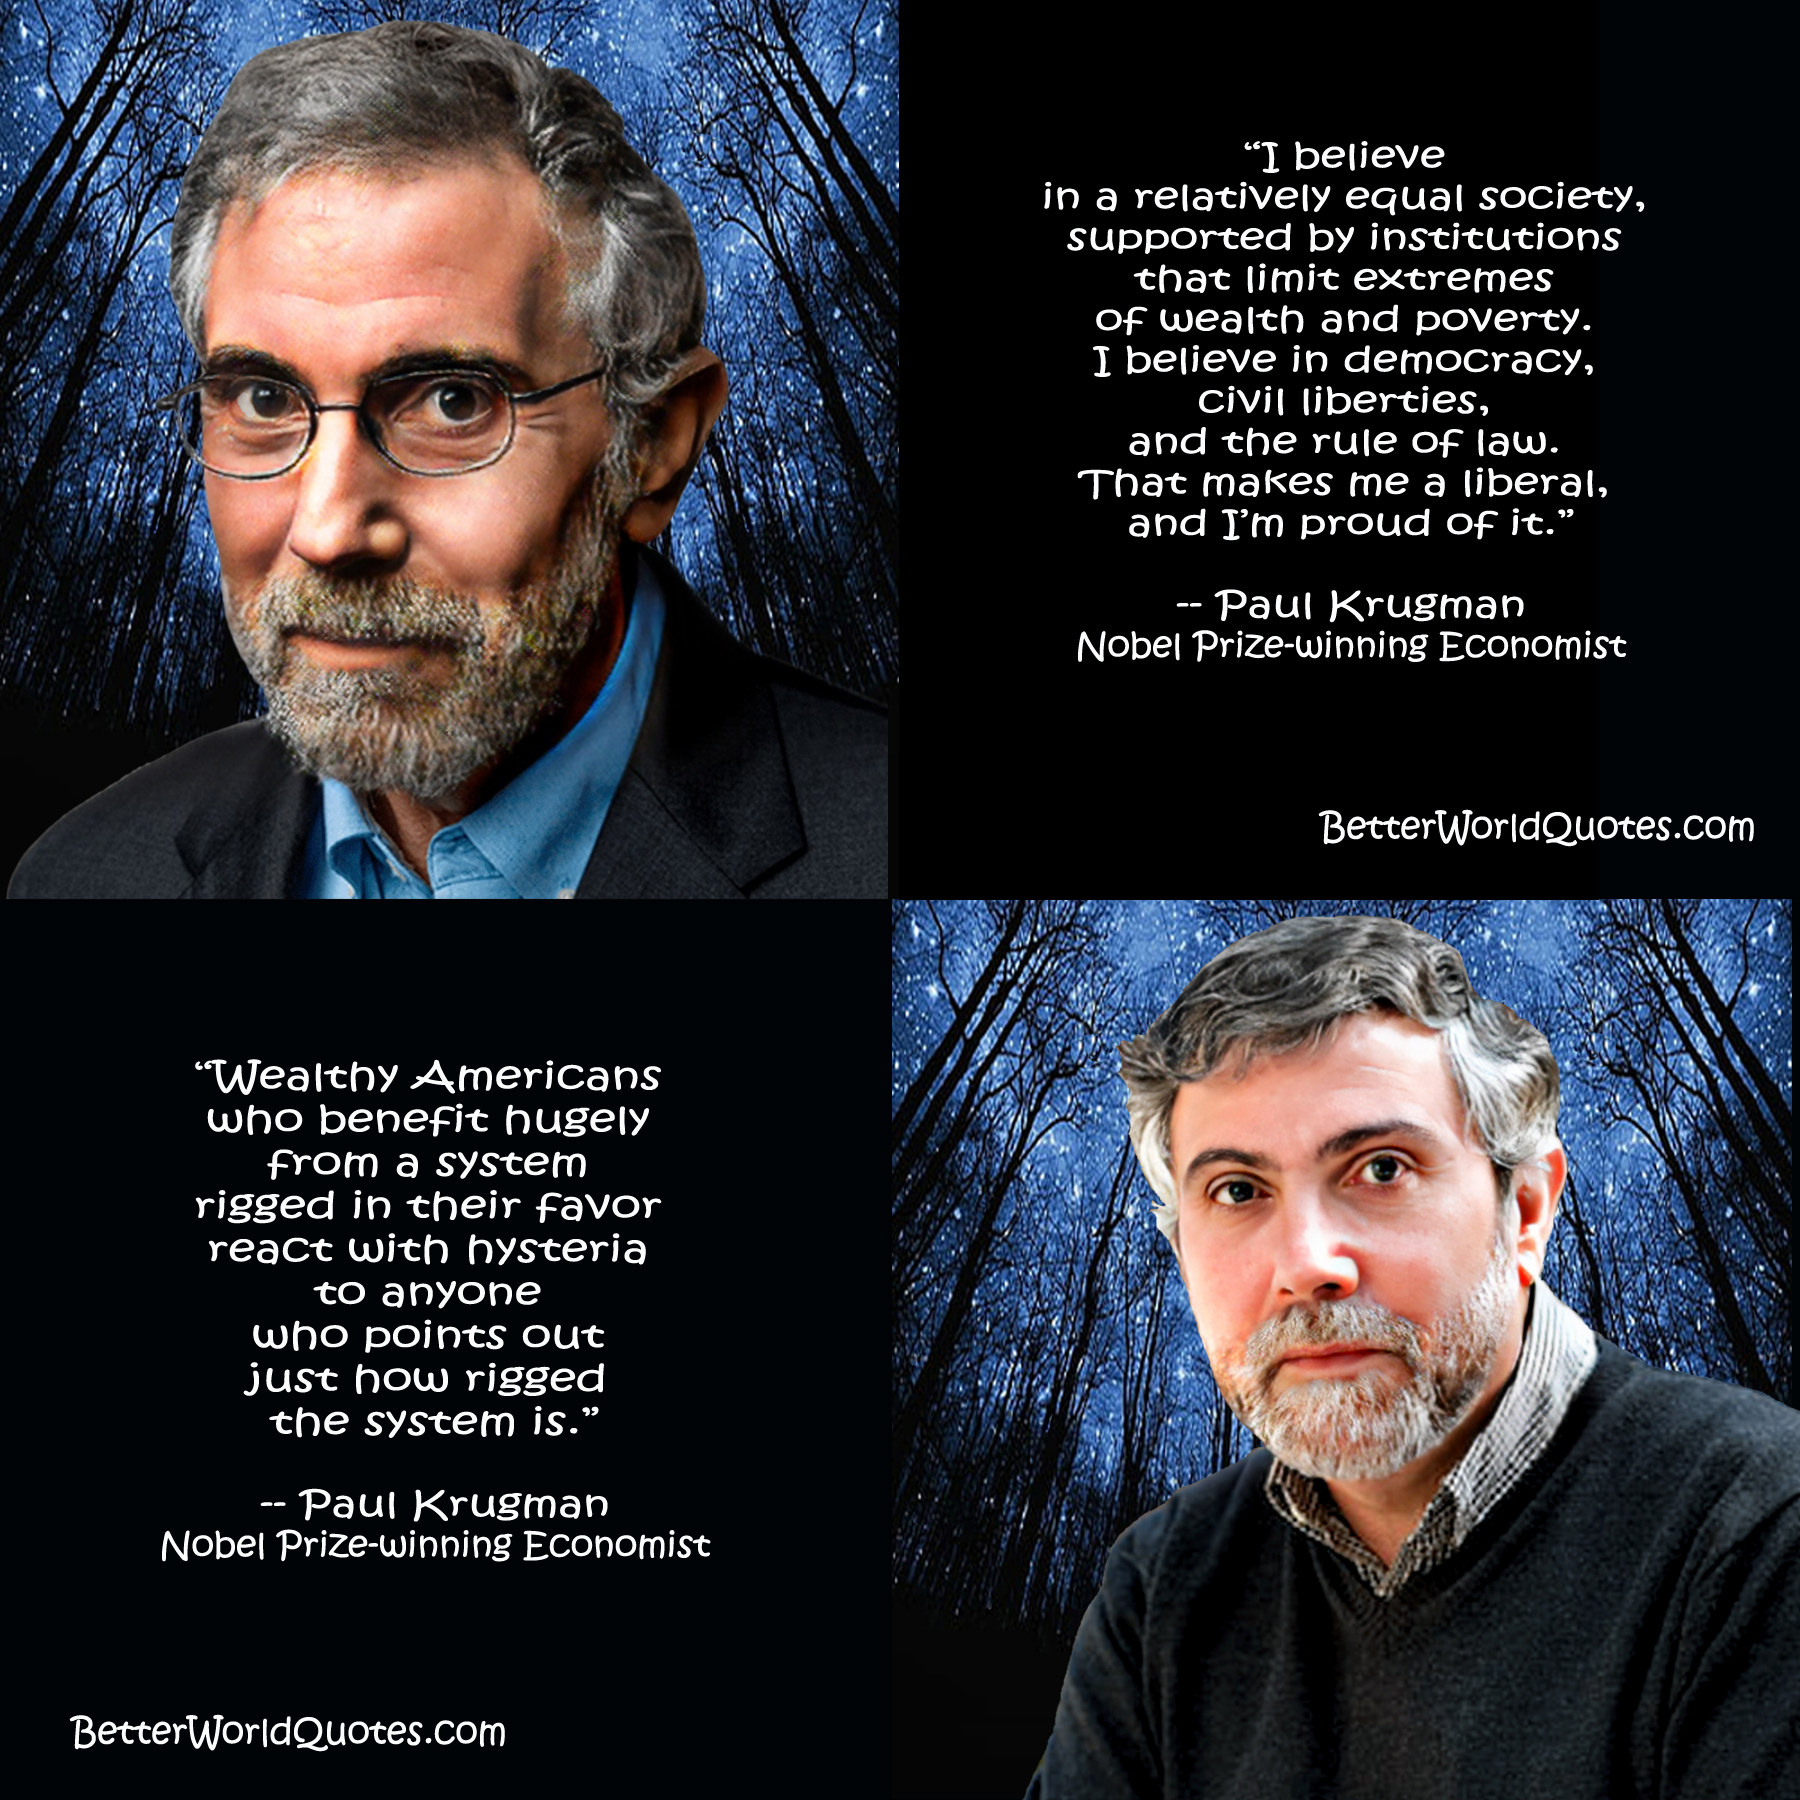 Paul Krugman: I believe in a relatively equal society, supported by institutions that limit extremes of wealth and poverty. I believe in democracy, civil liberties, and the rule of law. That makes me a liberal, and Im proud of it.